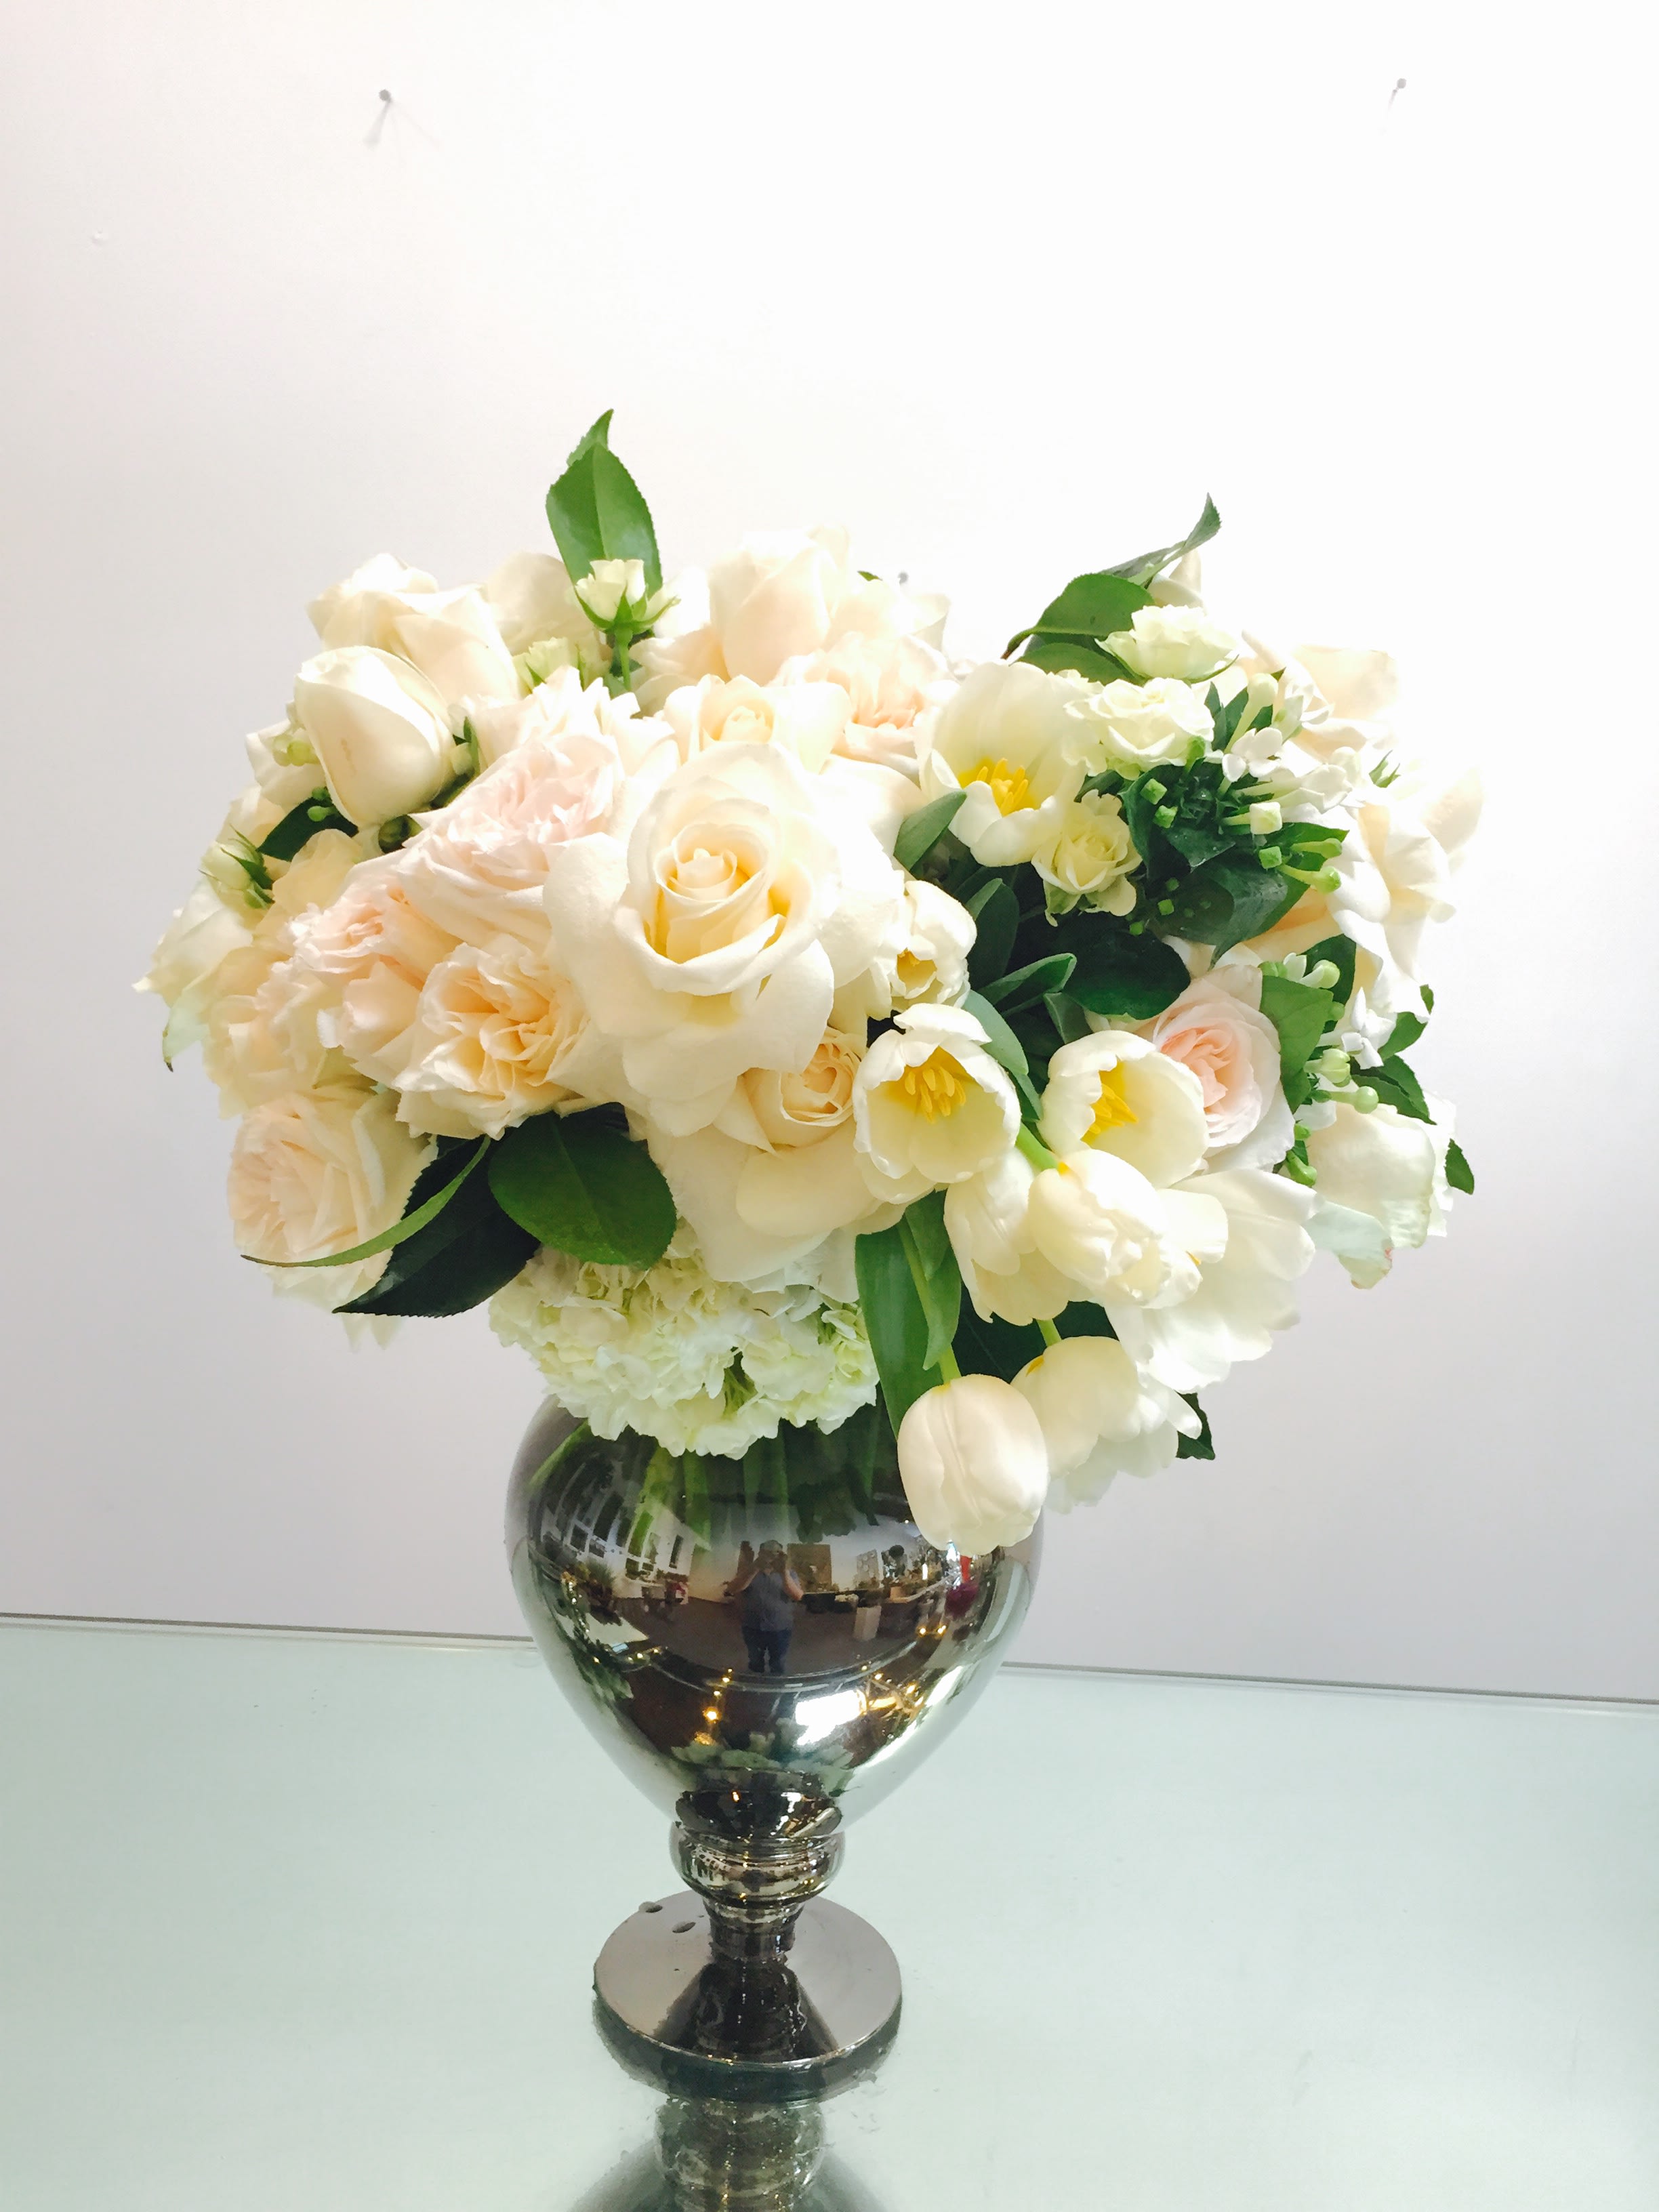 Fair Lady - A beautiful collection of varying shades of white blooms in a vintage vase.